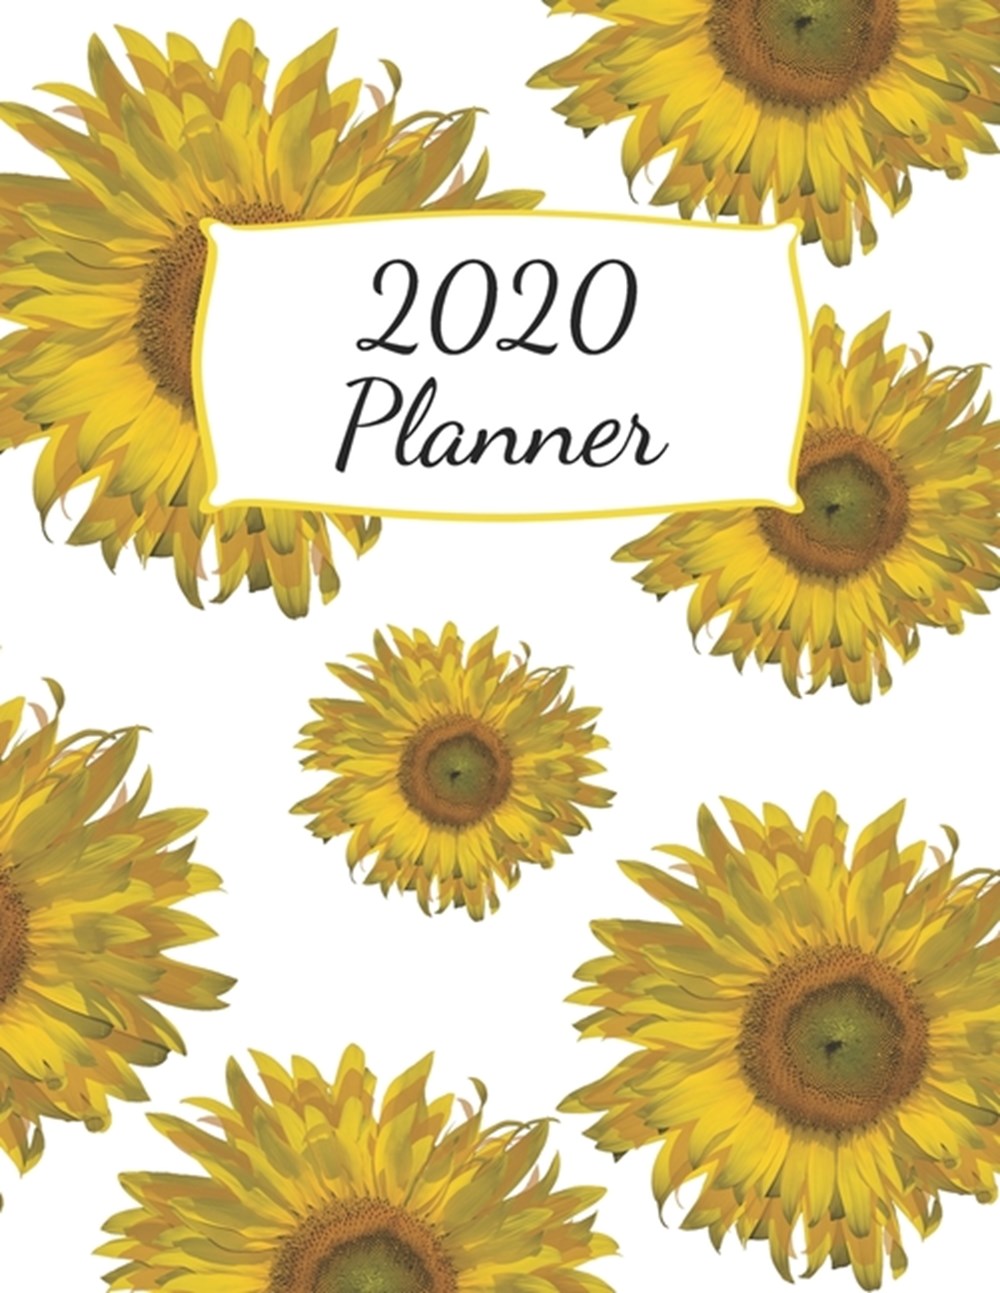 2020 Planner Dated Weekly Calendar with To-Do List - Yellow Sunflowers